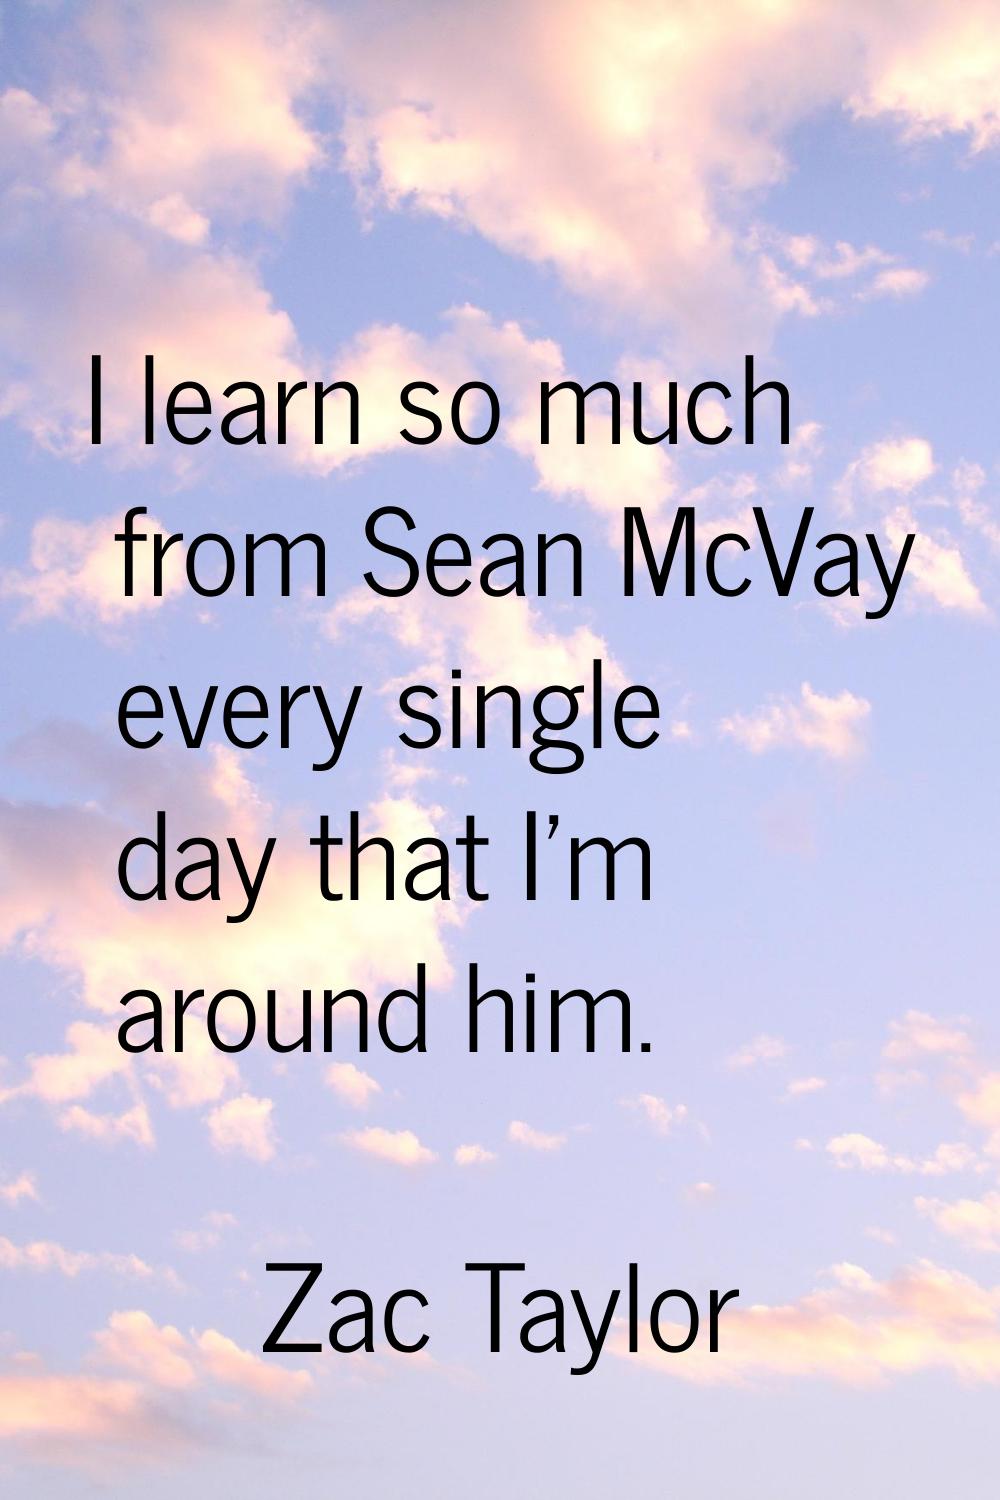 I learn so much from Sean McVay every single day that I'm around him.